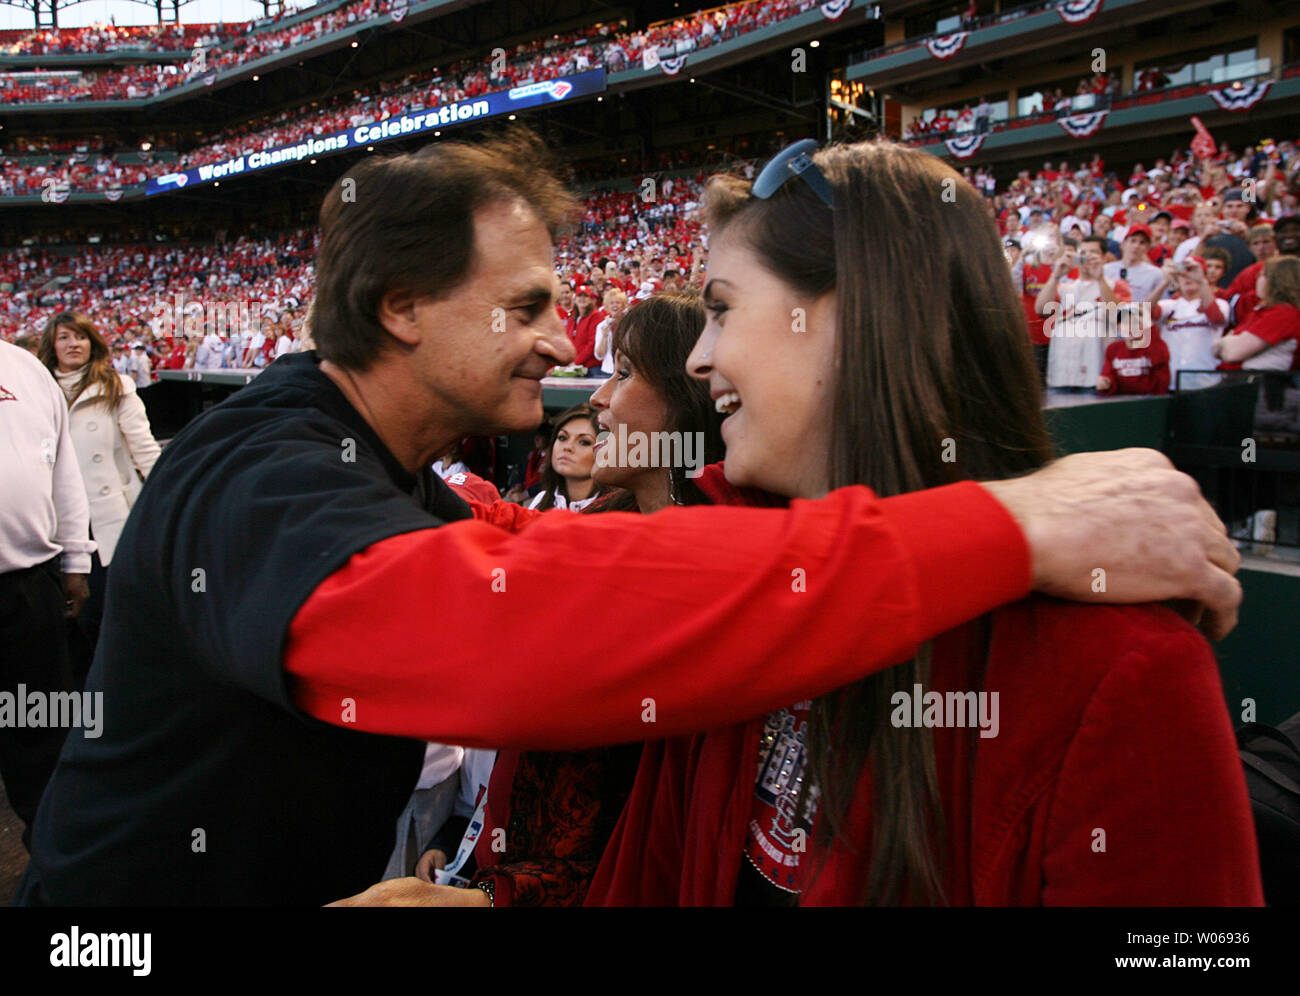 St. Louis Cardinals manager Tony La Russa hugs wife Elaine and daughter  Devon during a celebration ceremony for the new World Champions at Busch  Stadium in St. Louis on October 29, 2006.